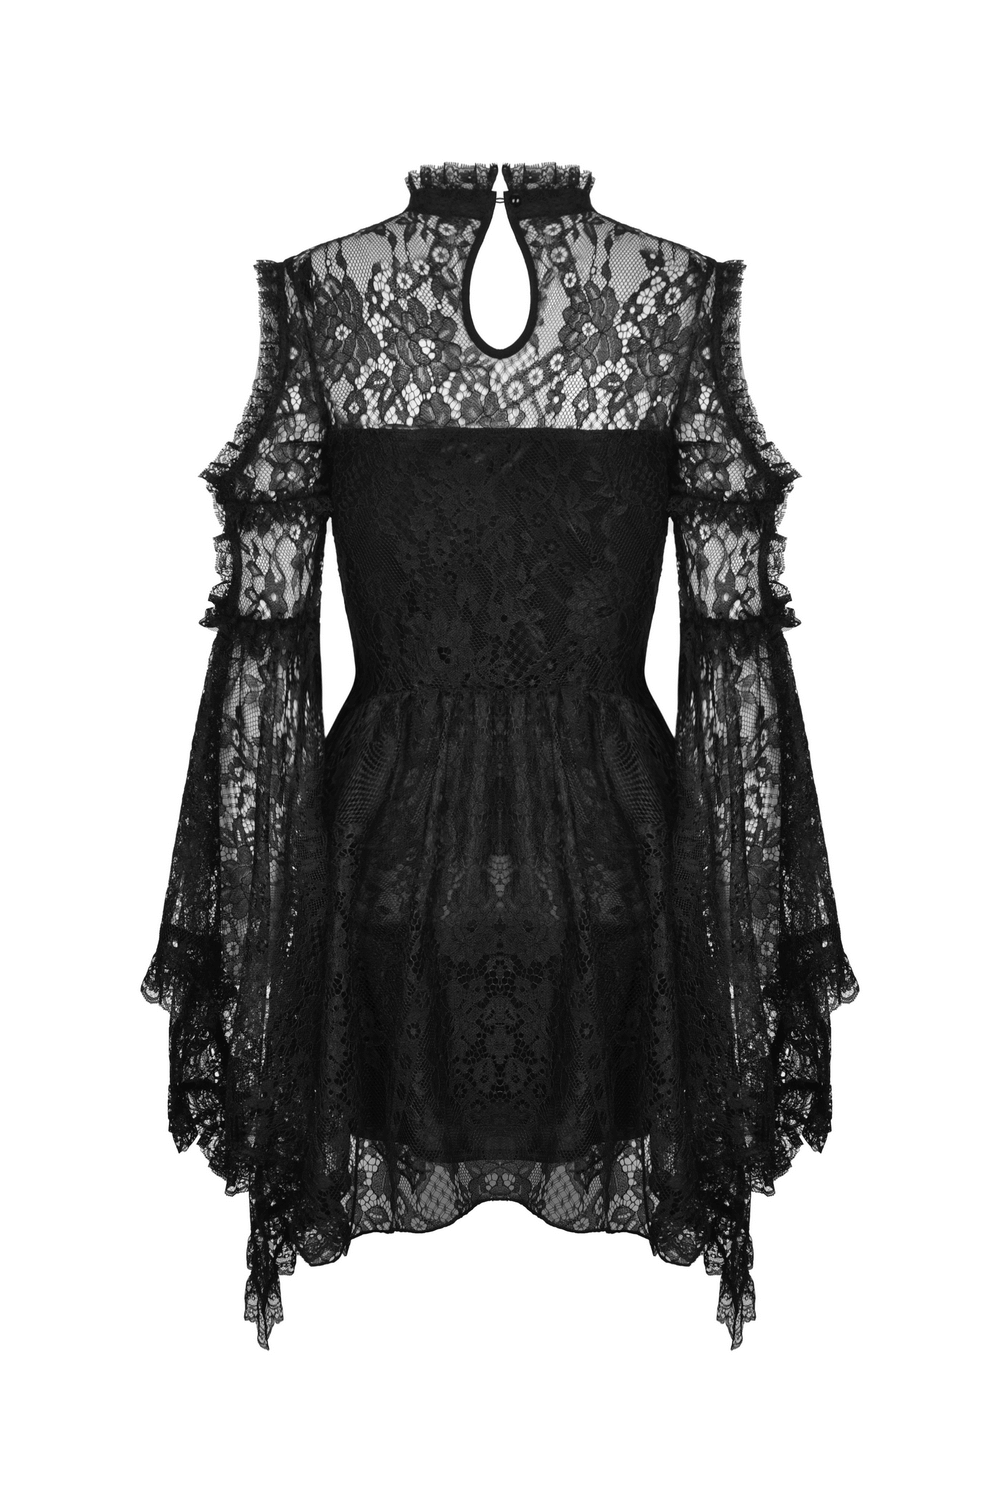 Gothic Inspired Lace Attire with Victorian Elegance